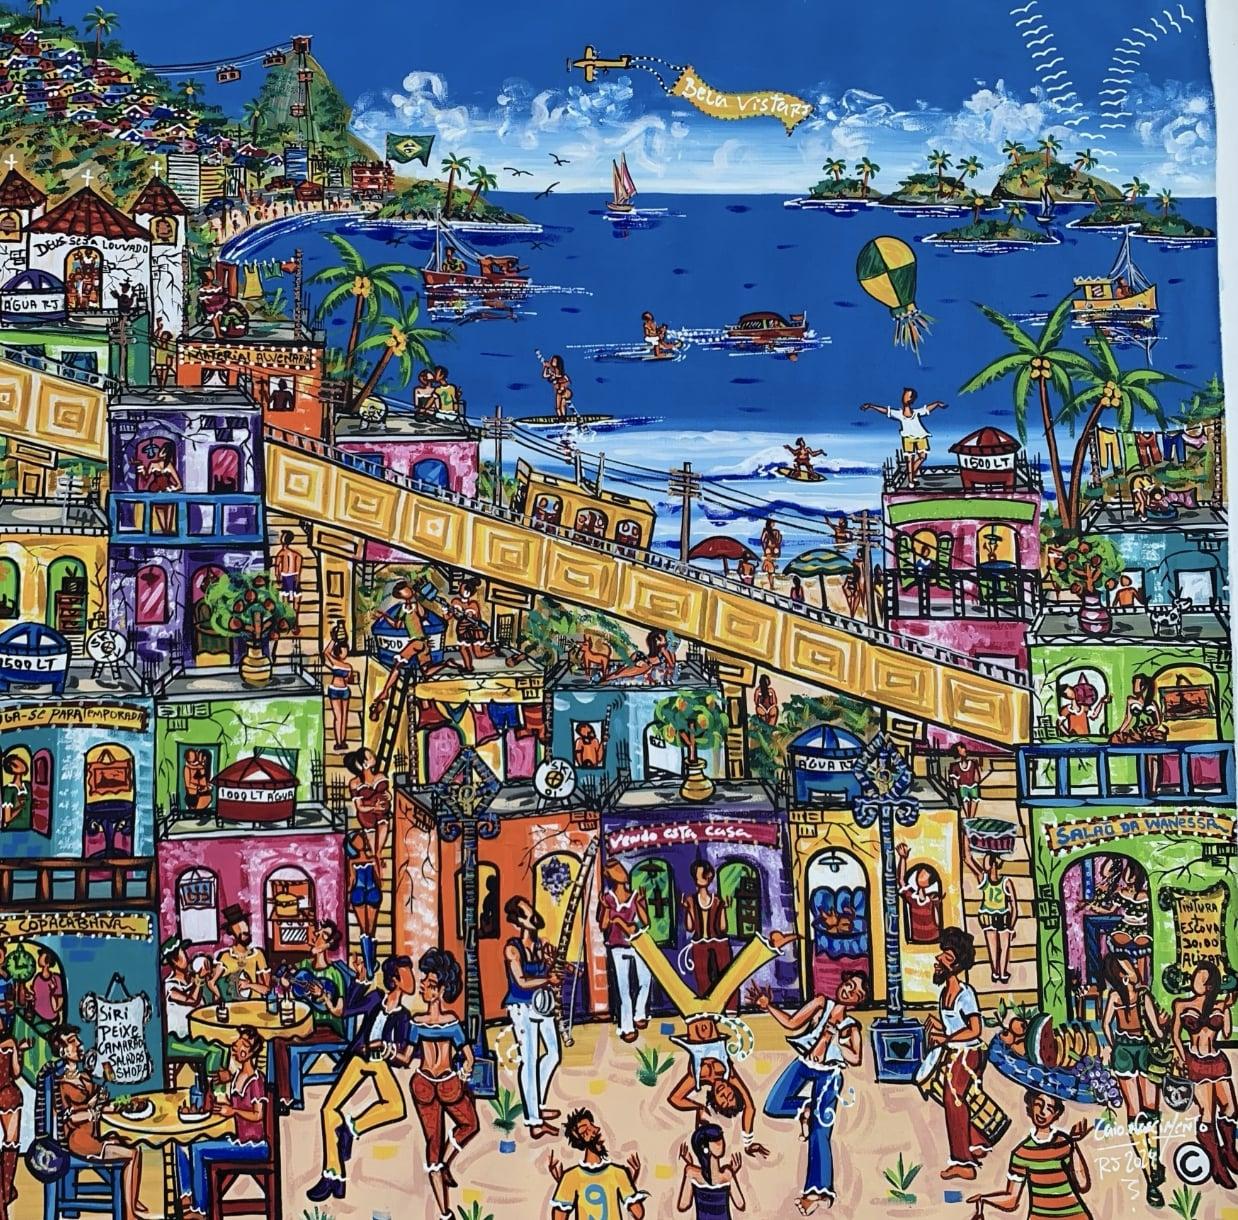 "Copoeira in Favela, with a View of Copacabana" depicts the rich tapestry of Brazilian culture through the lens of city life. In the foreground, individuals engage in the traditional Afro-Brazilian dance of Capoeira, their movements a vibrant